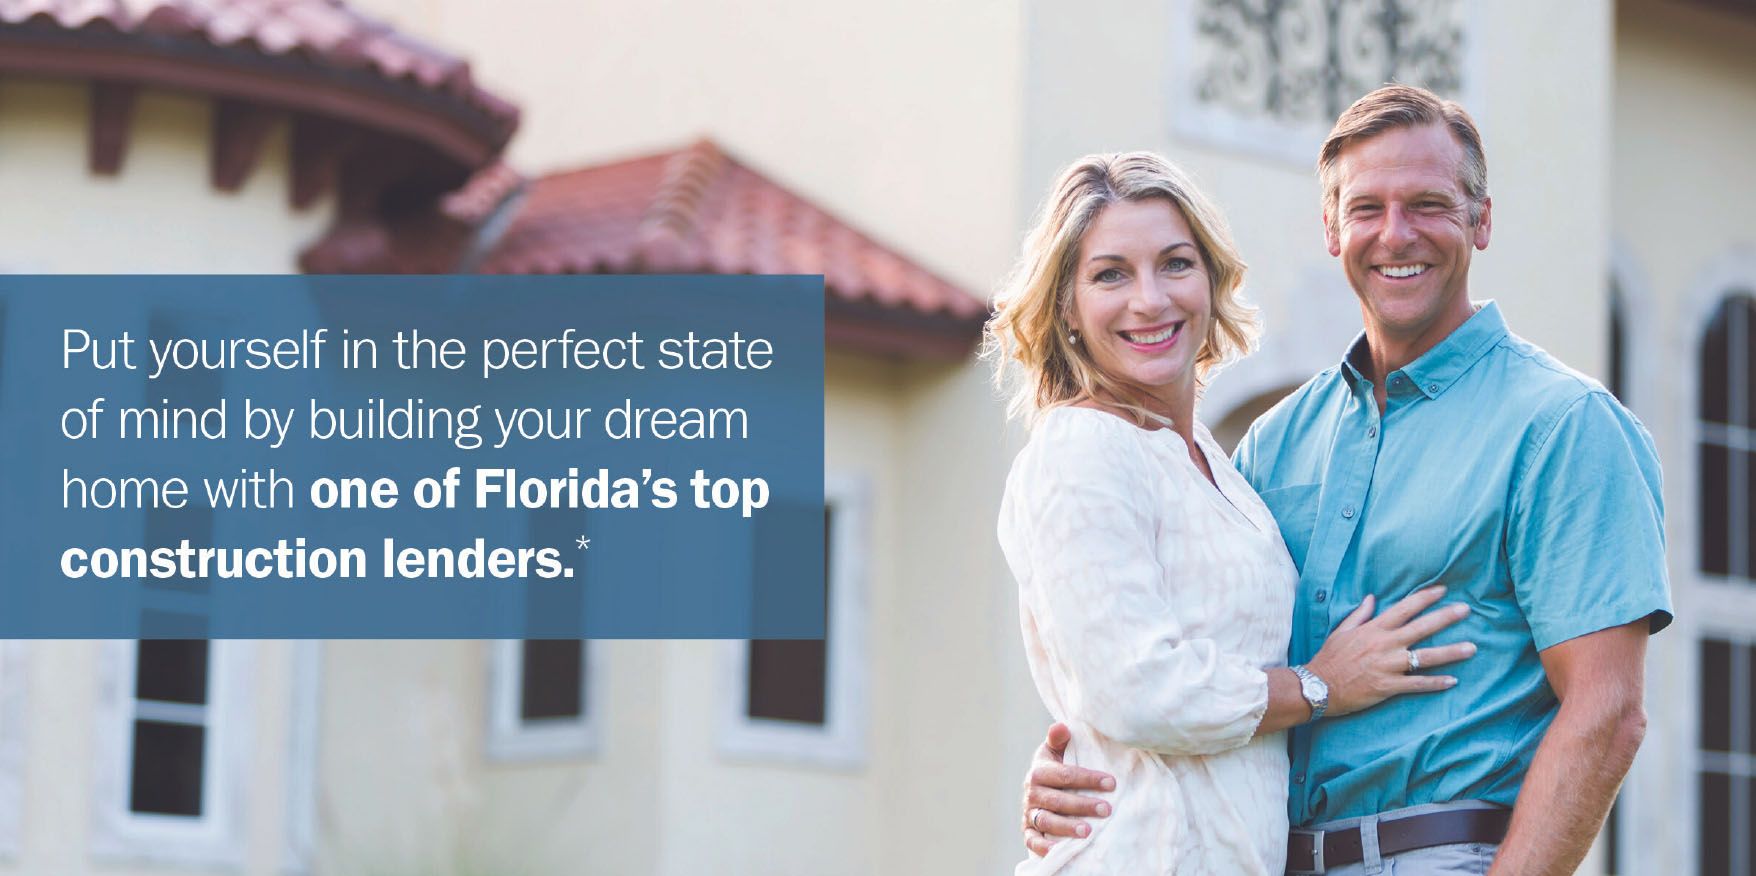 Put yourself in the perfect state of mind by building your dream home with one of Florida's top construction lenders.